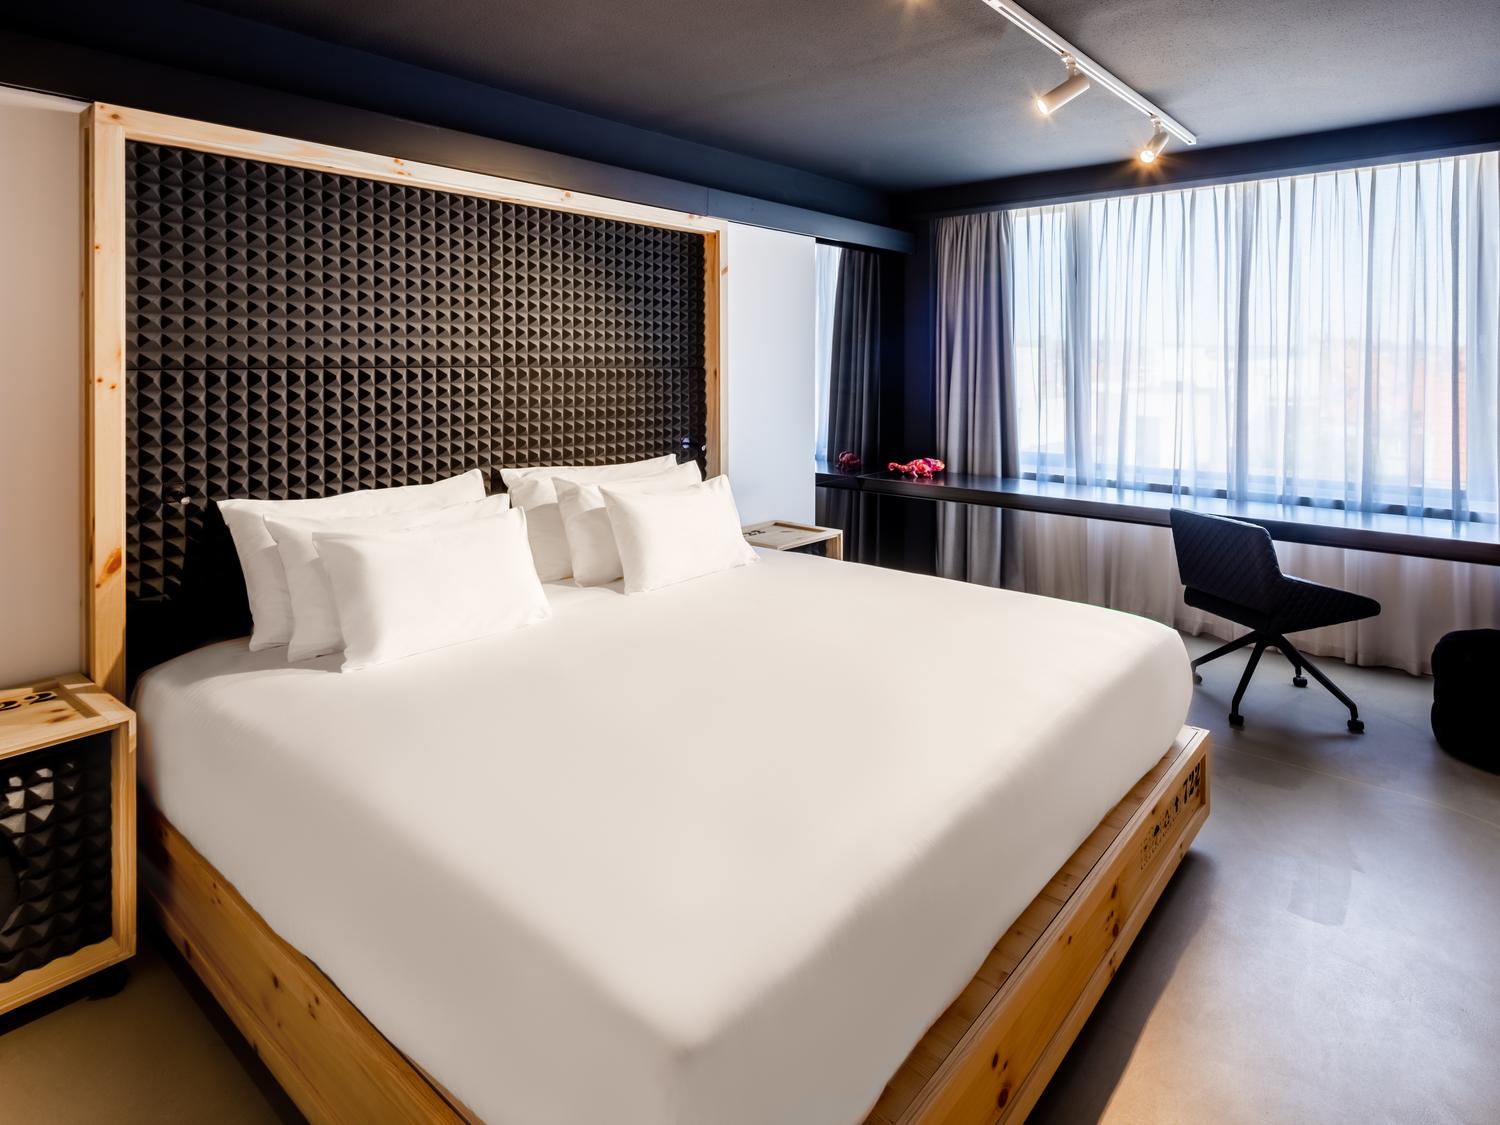 where-to-stay-in-brussels-9-hostels-and-hotels-for-every-price-range